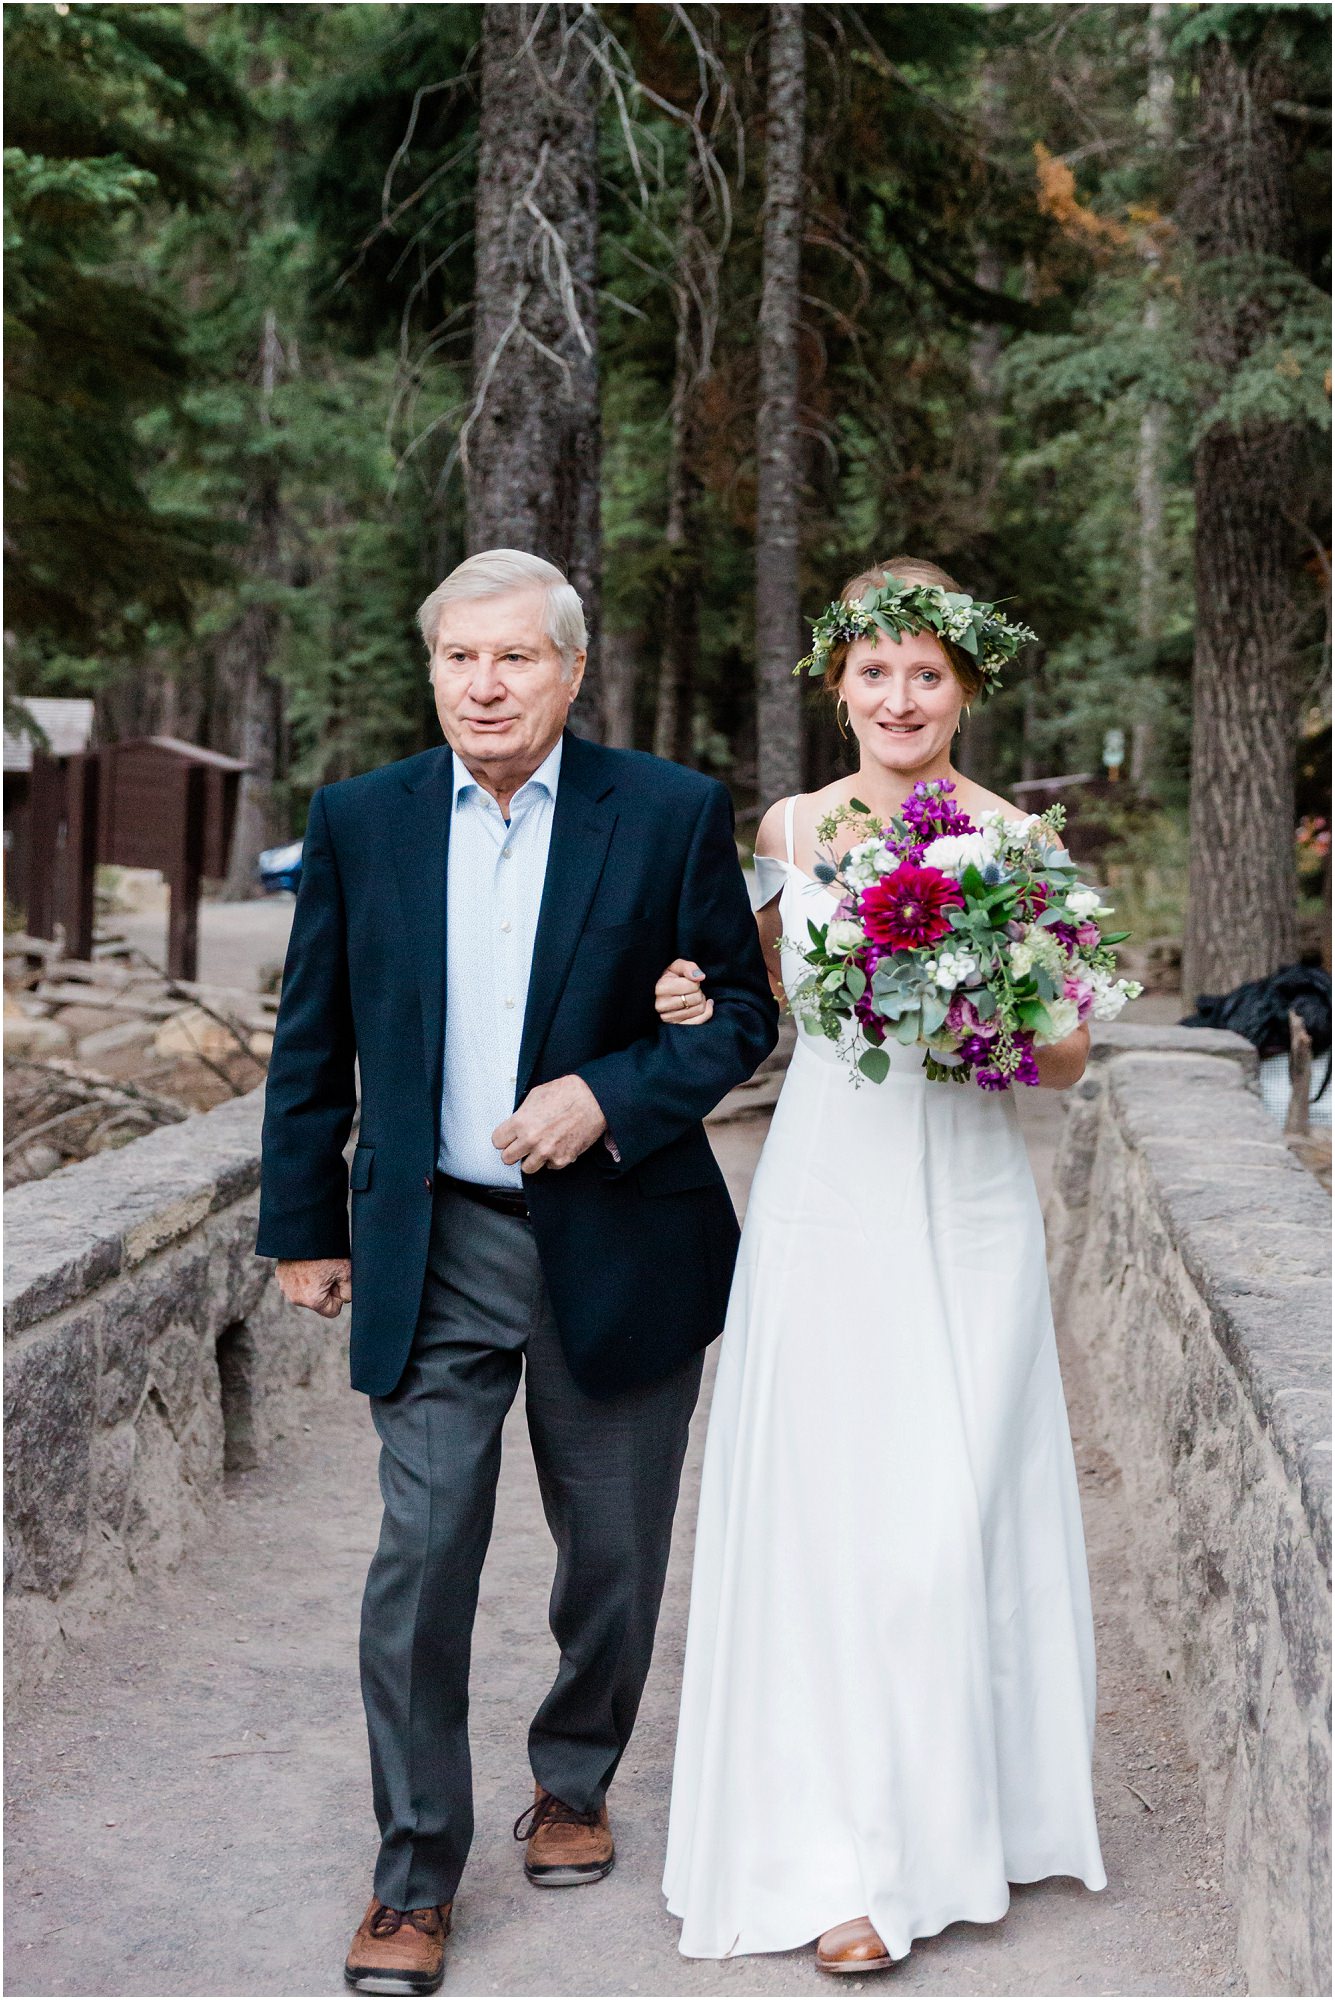 A bride wearing a floral crown is escorted by her father at her Tumalo Falls elopement in Bend, Oregon. | Erica Swantek Photography